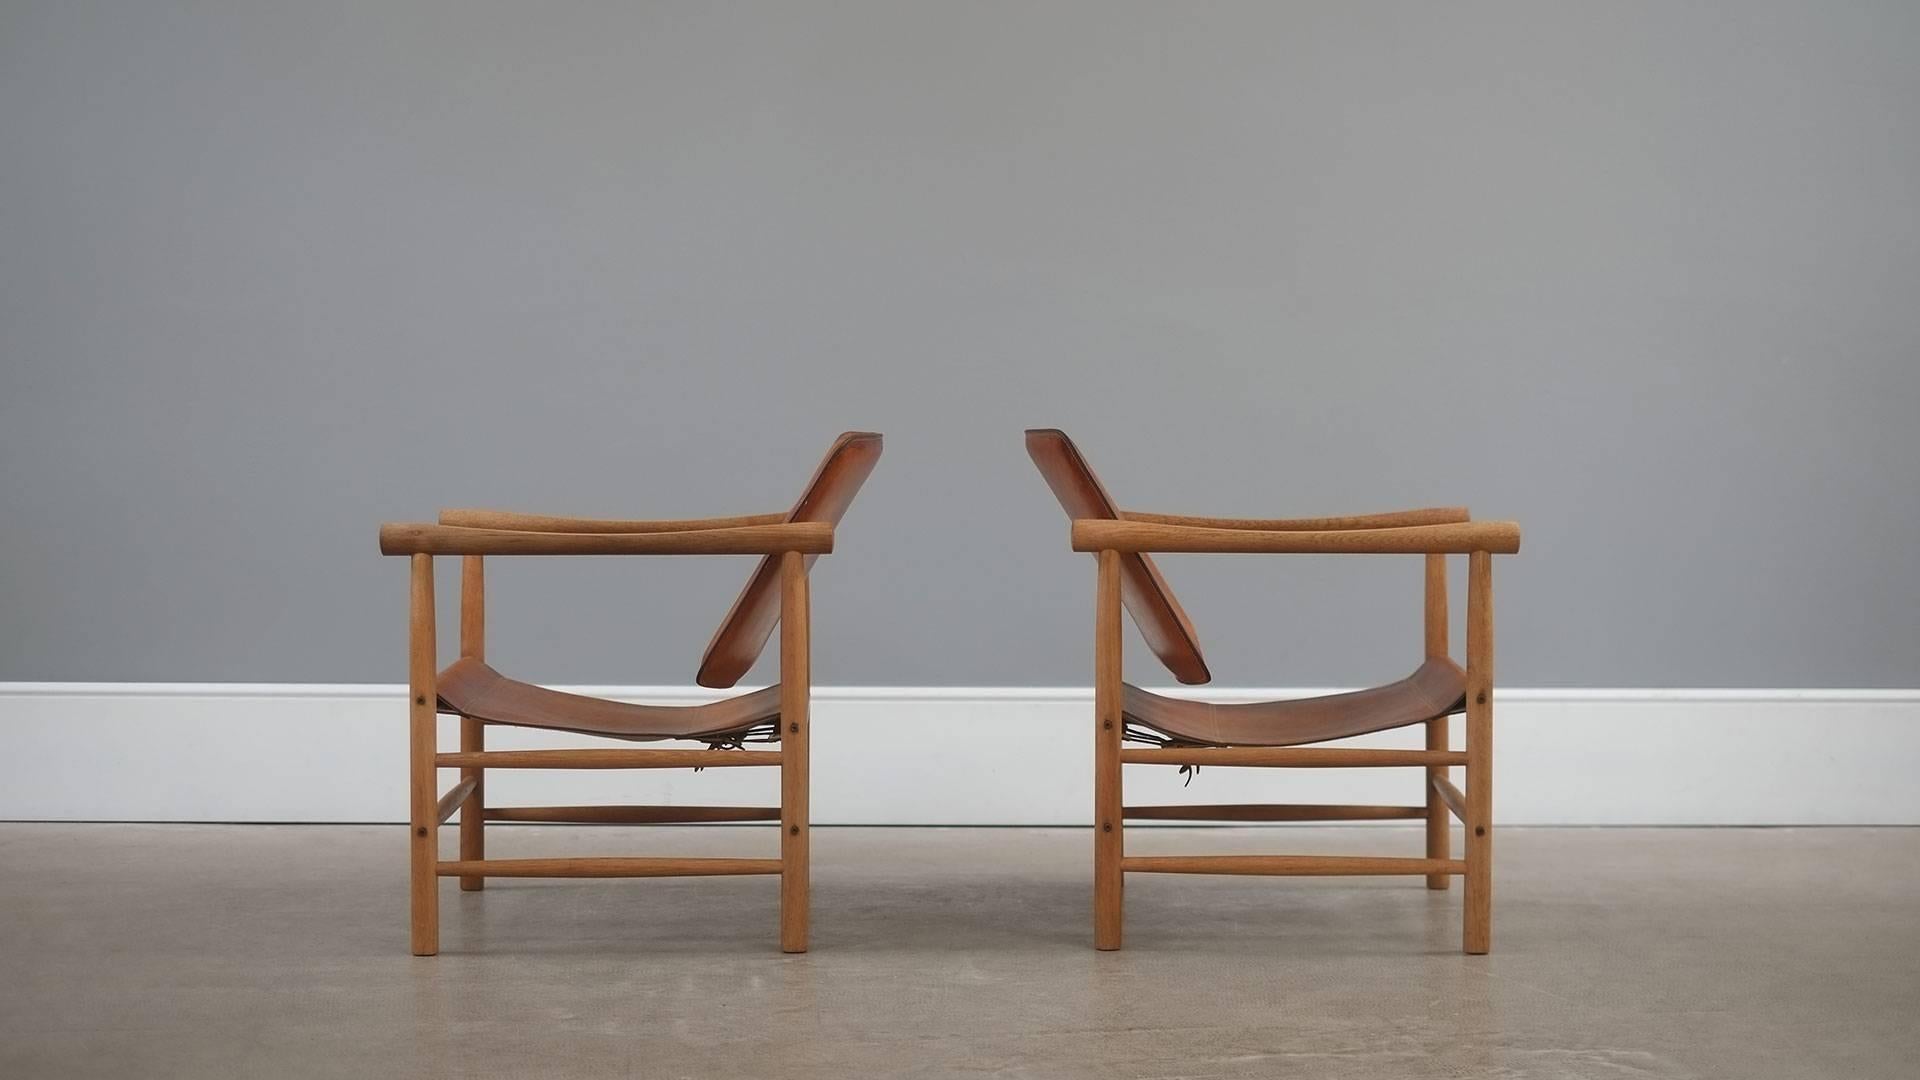 Amazing pair of rare Safari armchairs in solid oak with stitched saddle leather seats and backs designed by Kai Lyngfeldt Larsen for Soborg Mobler, Denmark. Wonderful chairs with perfect patina.